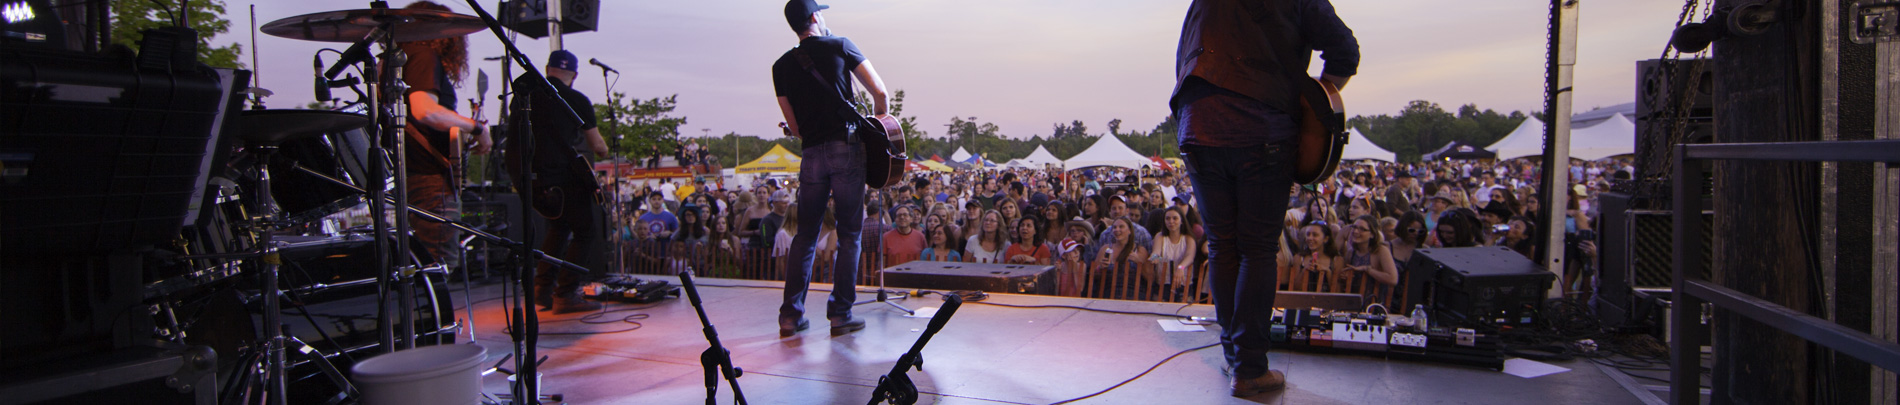 View from the stage at an outdoor concert